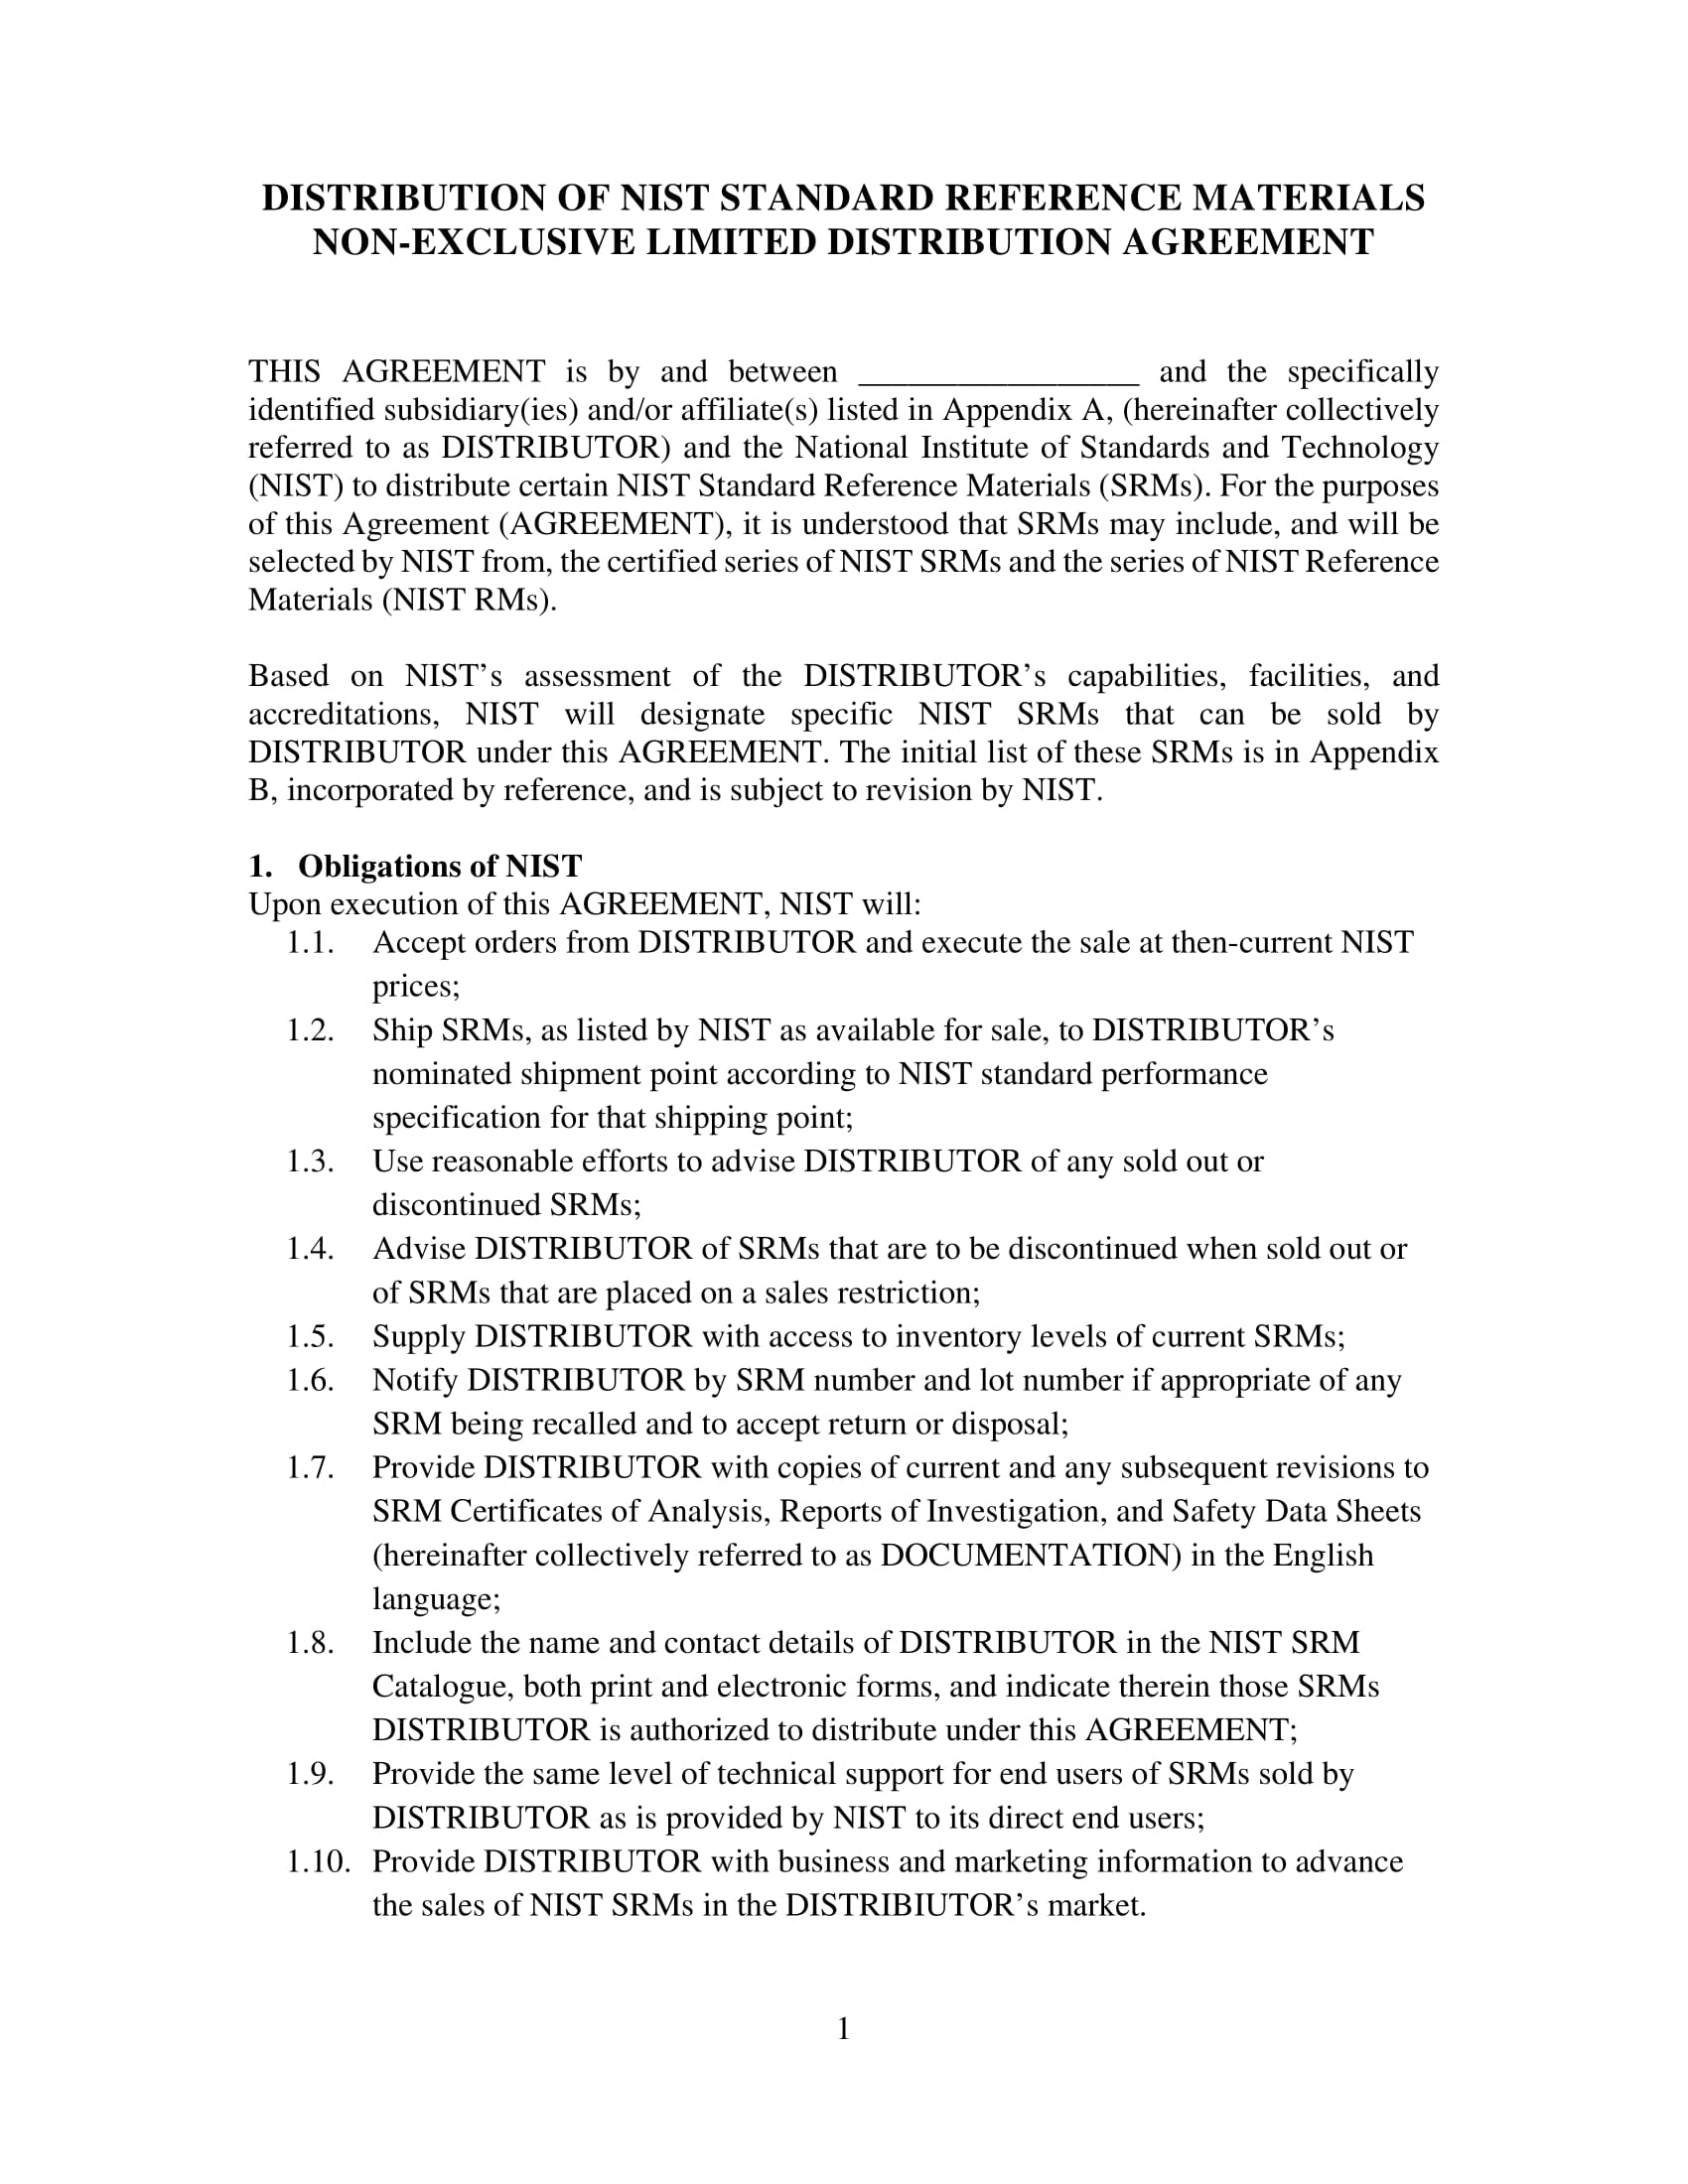 non exclusive distribution agreement contract form 01